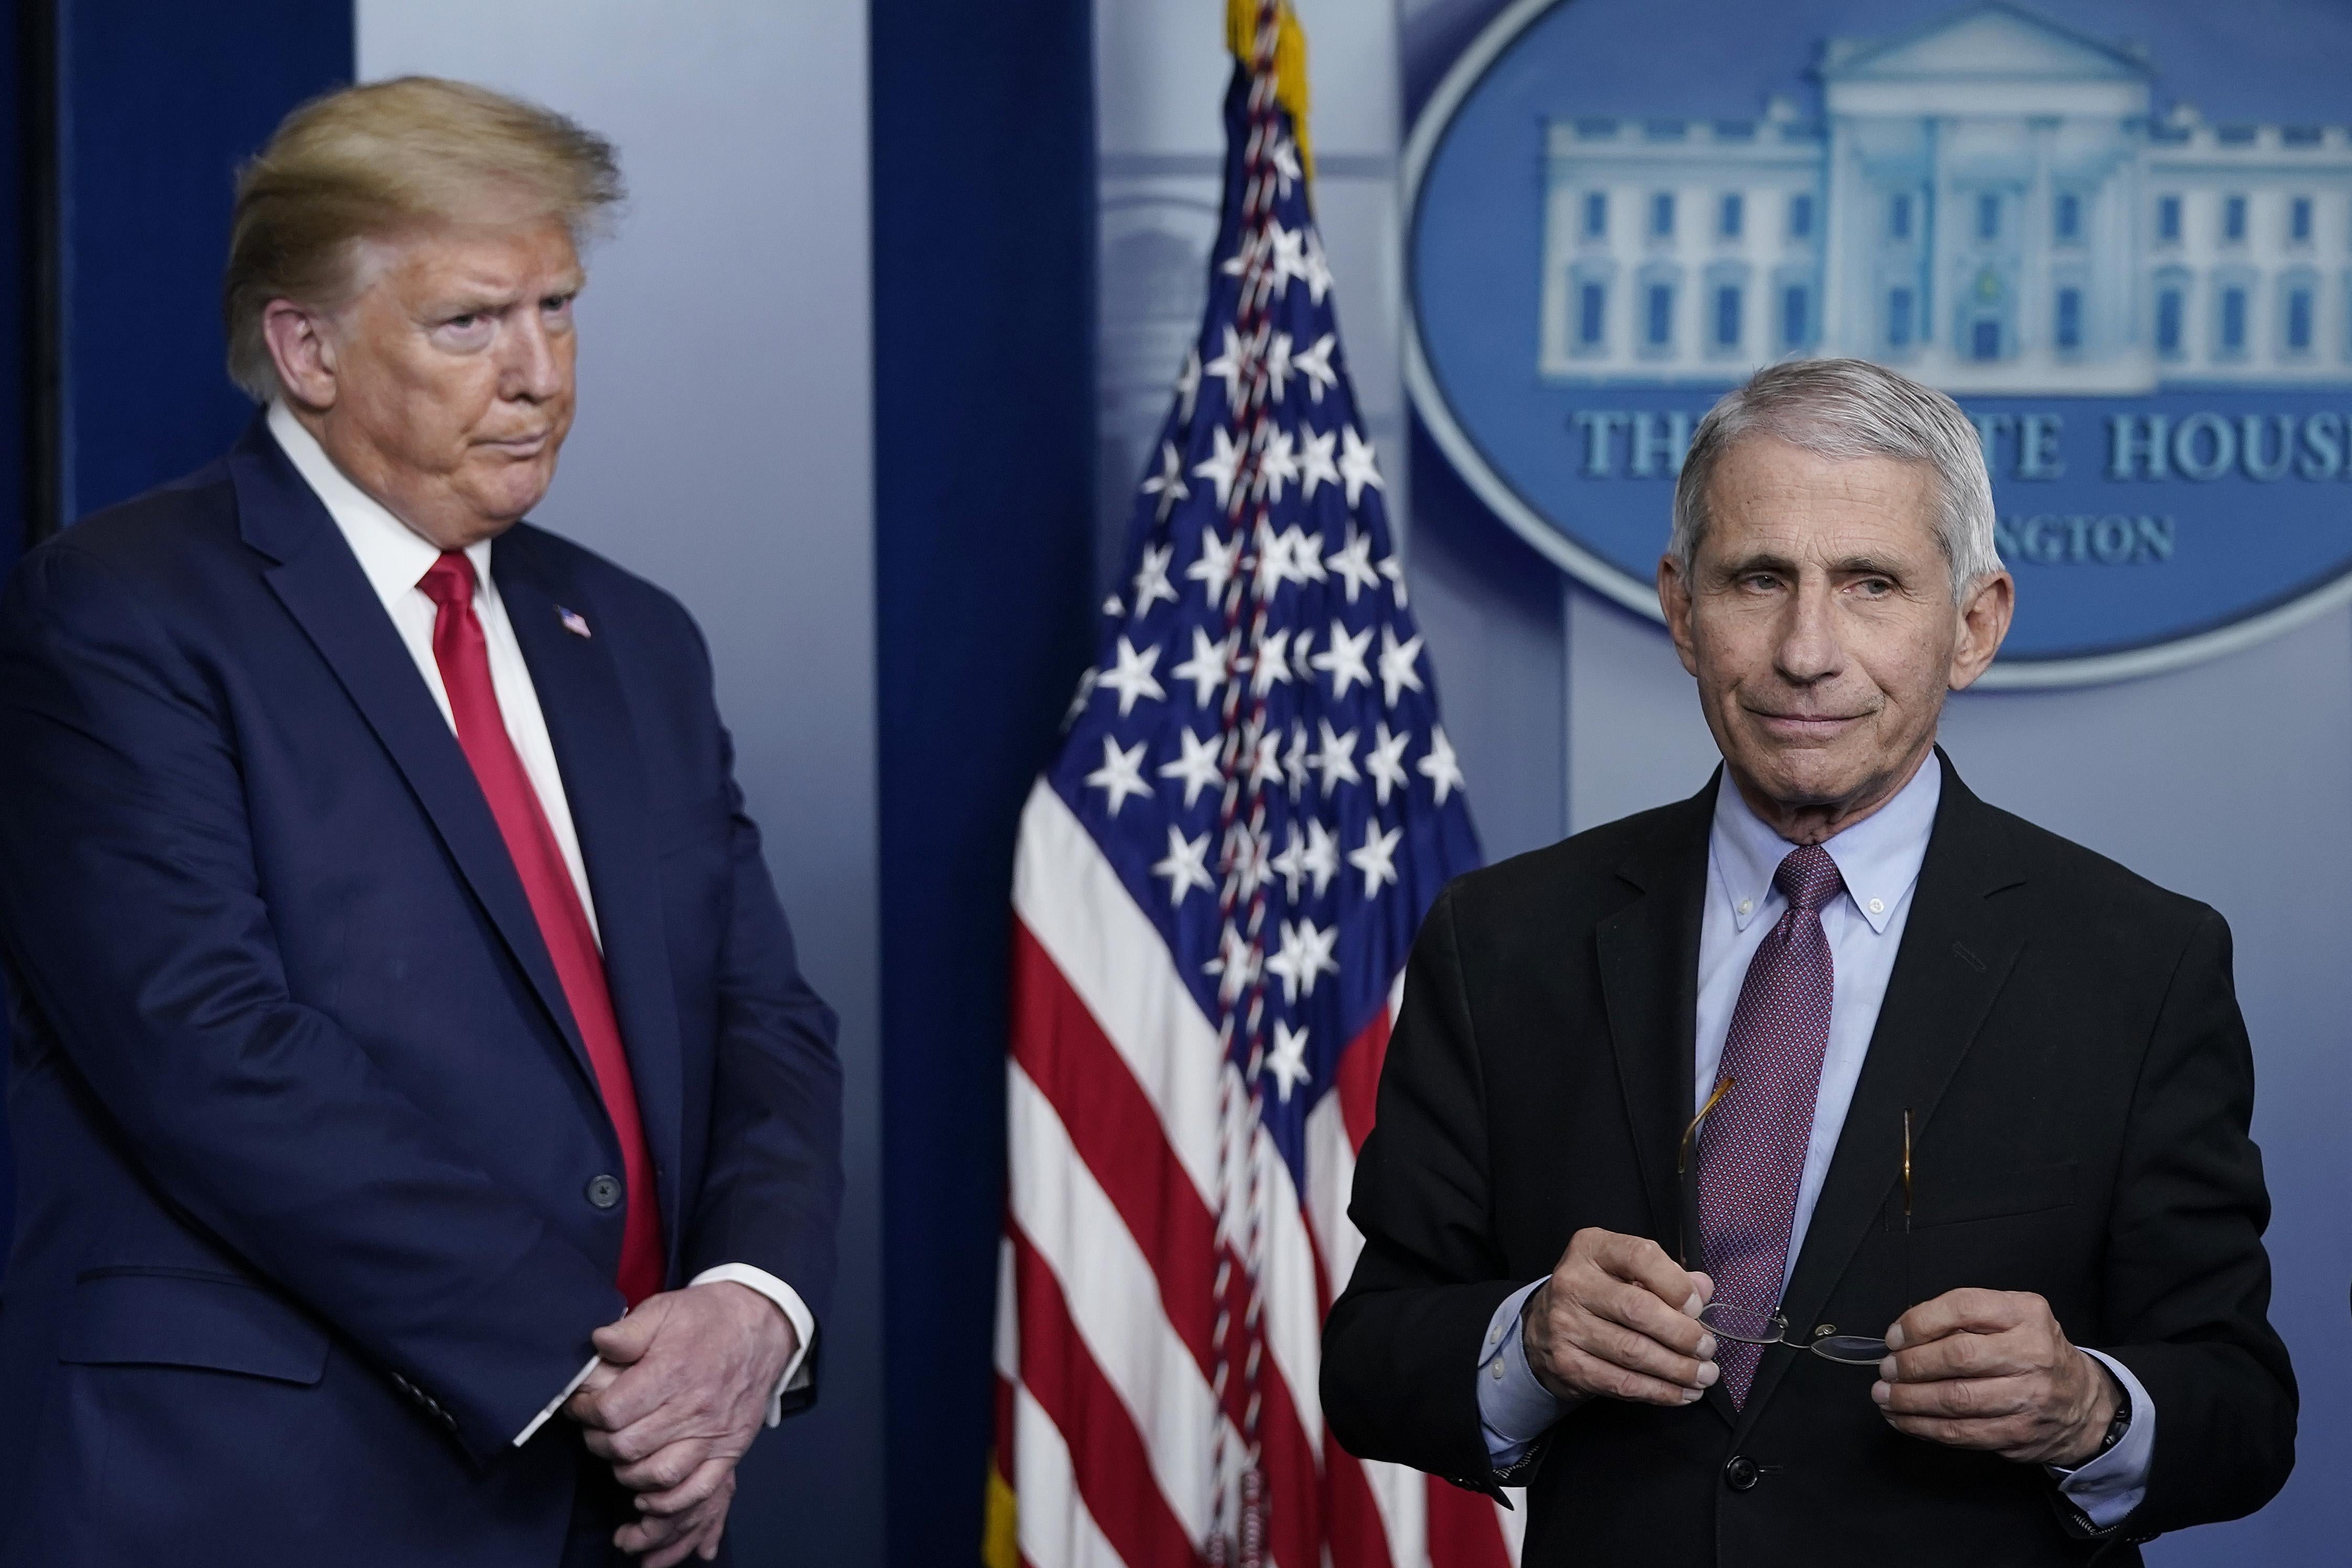 Trump, with furrowed brow, on the left, and Fauci holding his glasses, looking off to the side, on the right.